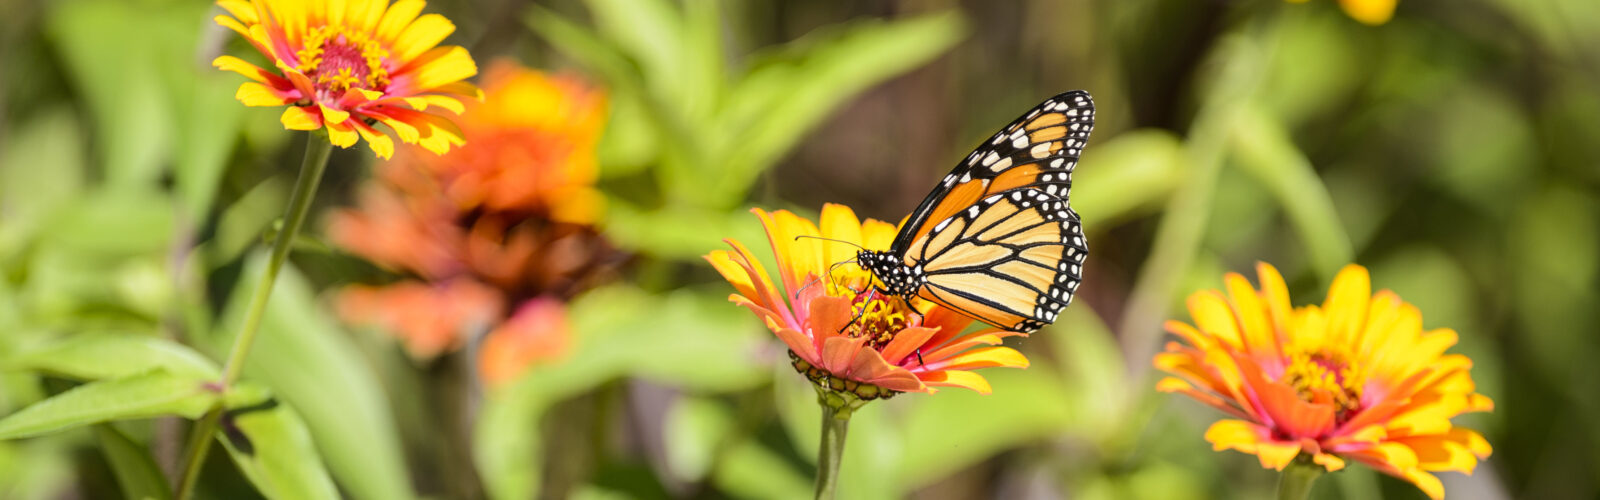 Photograph of a monarch butterfly collecting pollen from an orange flower